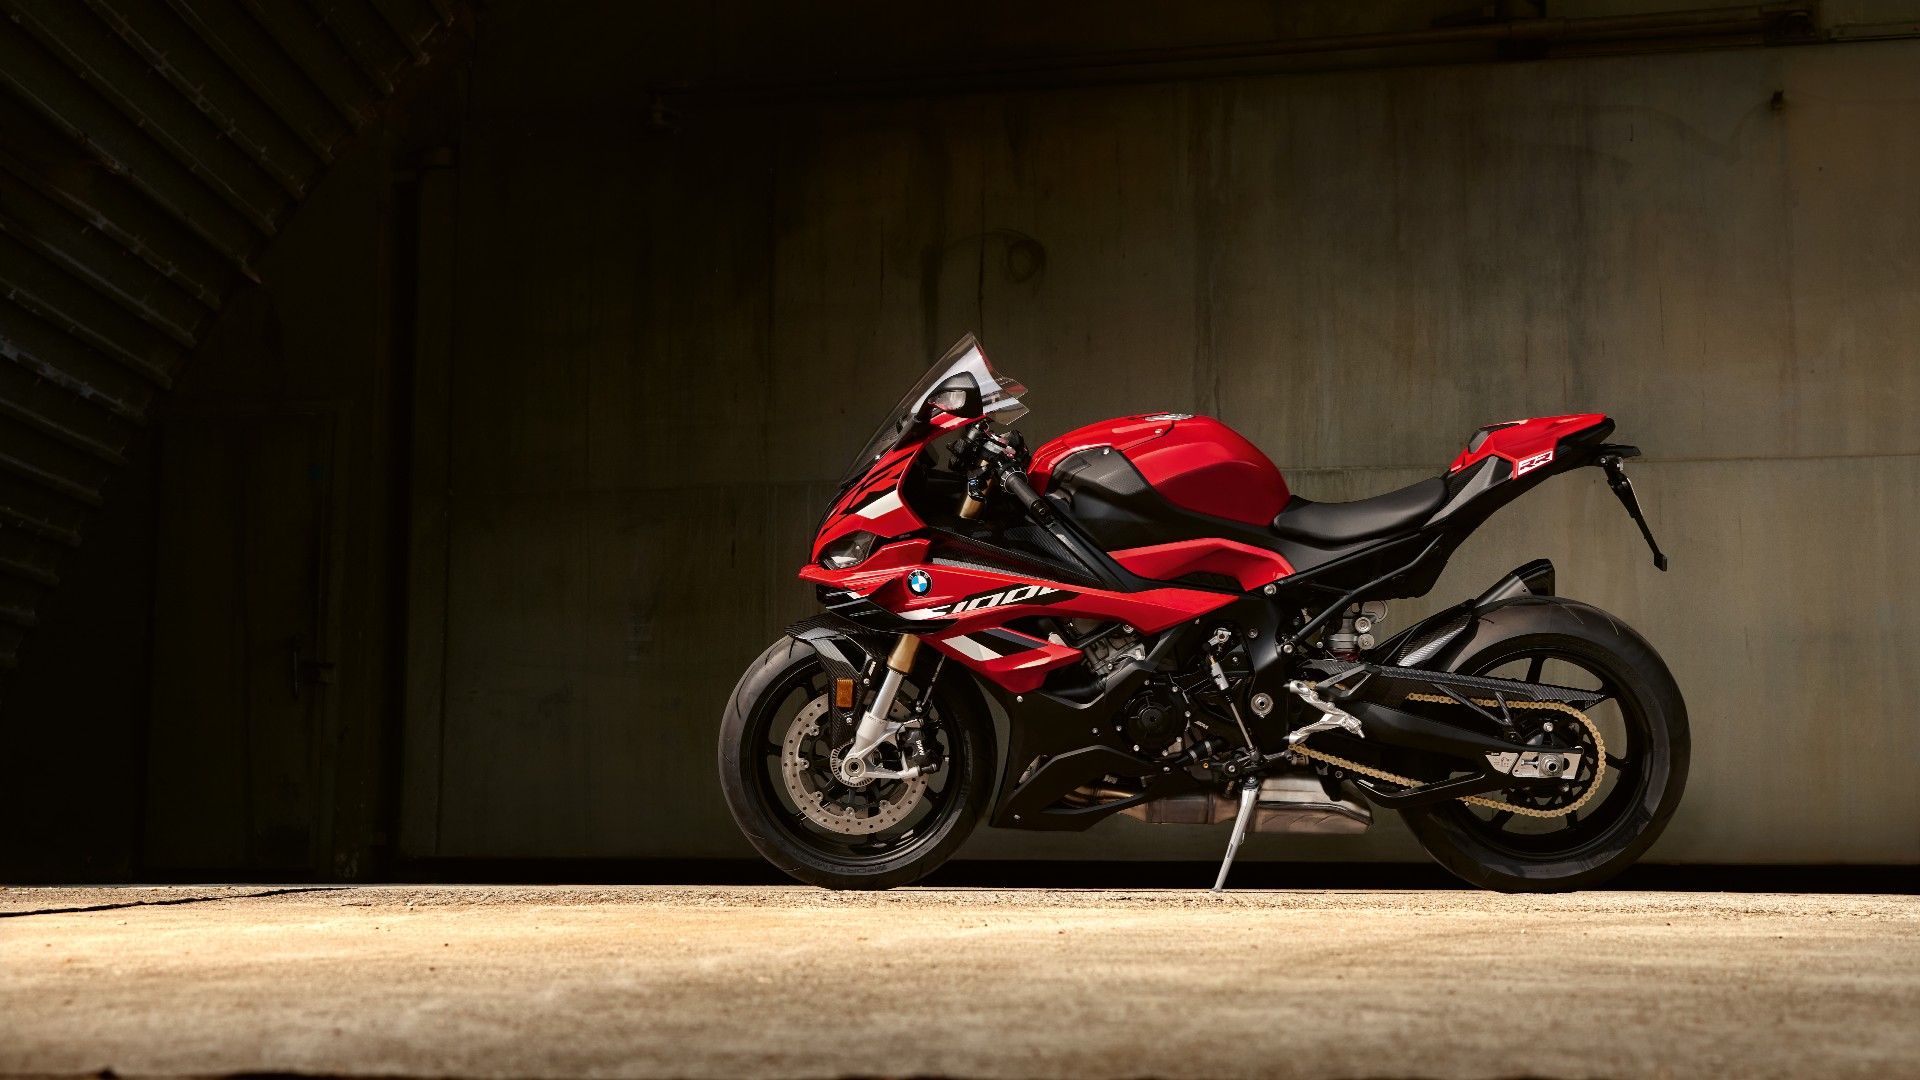 10 Reasons Why The BMW S 1000 RR Is The Ultimate Superbike